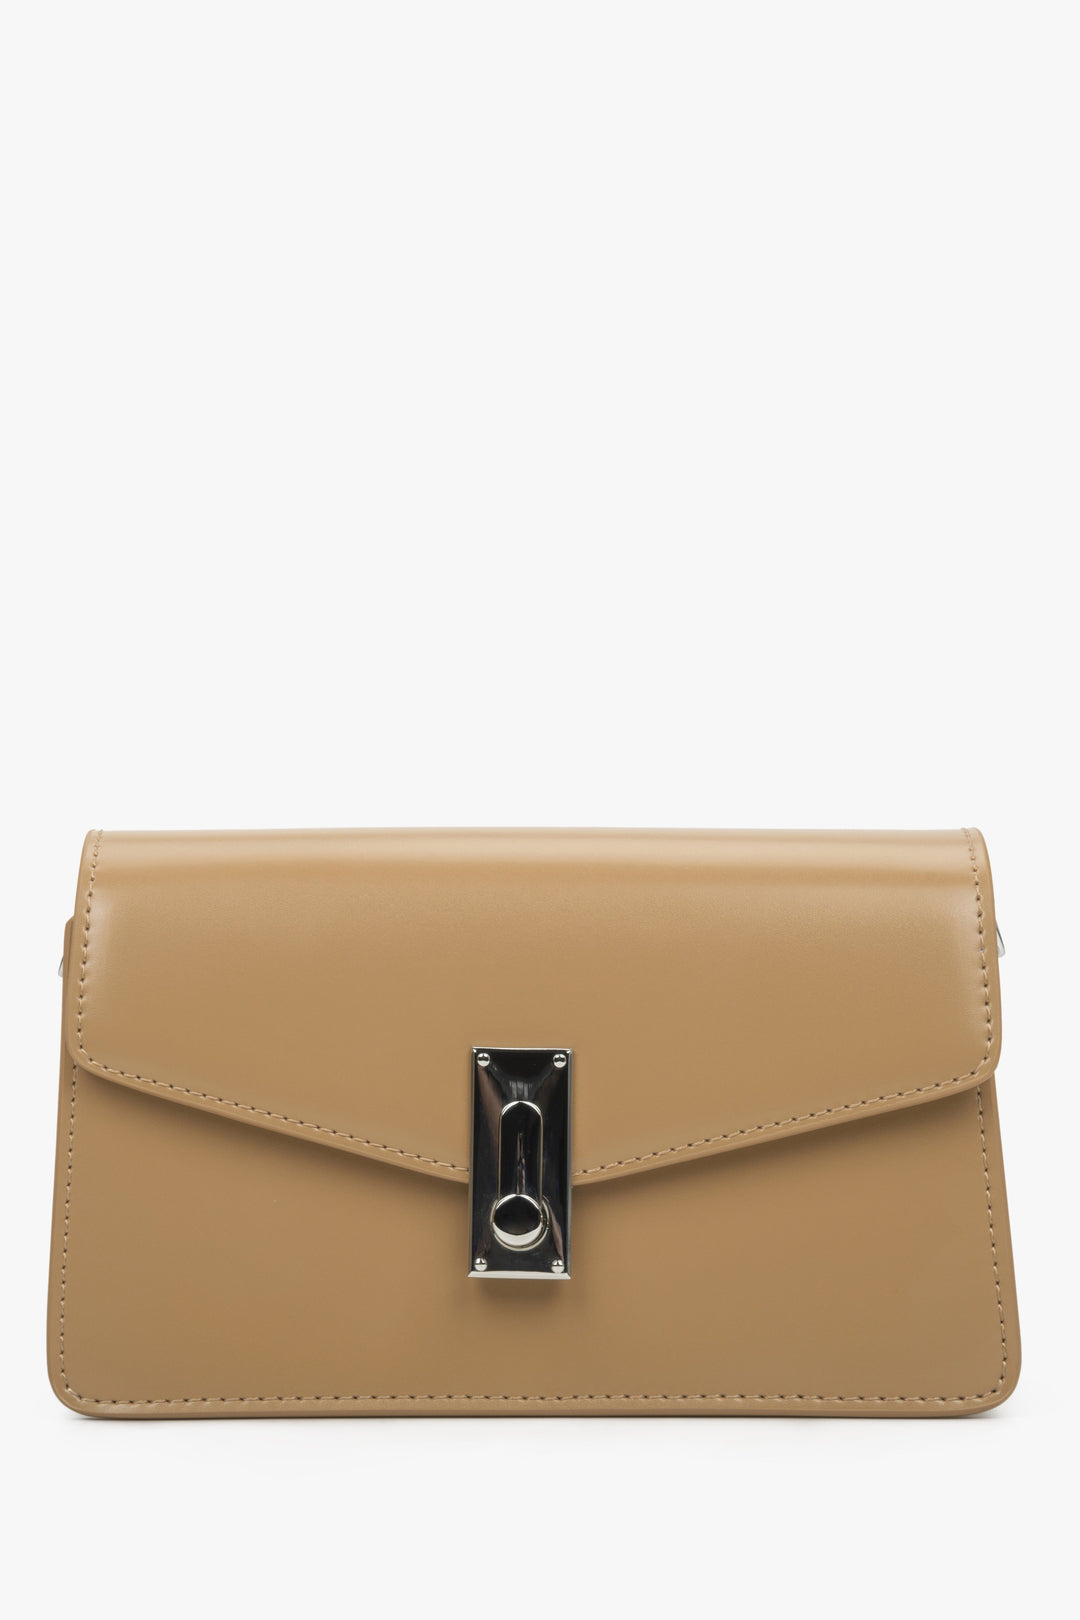 Women's Estro light brown leather shoulder bag with silver accents.